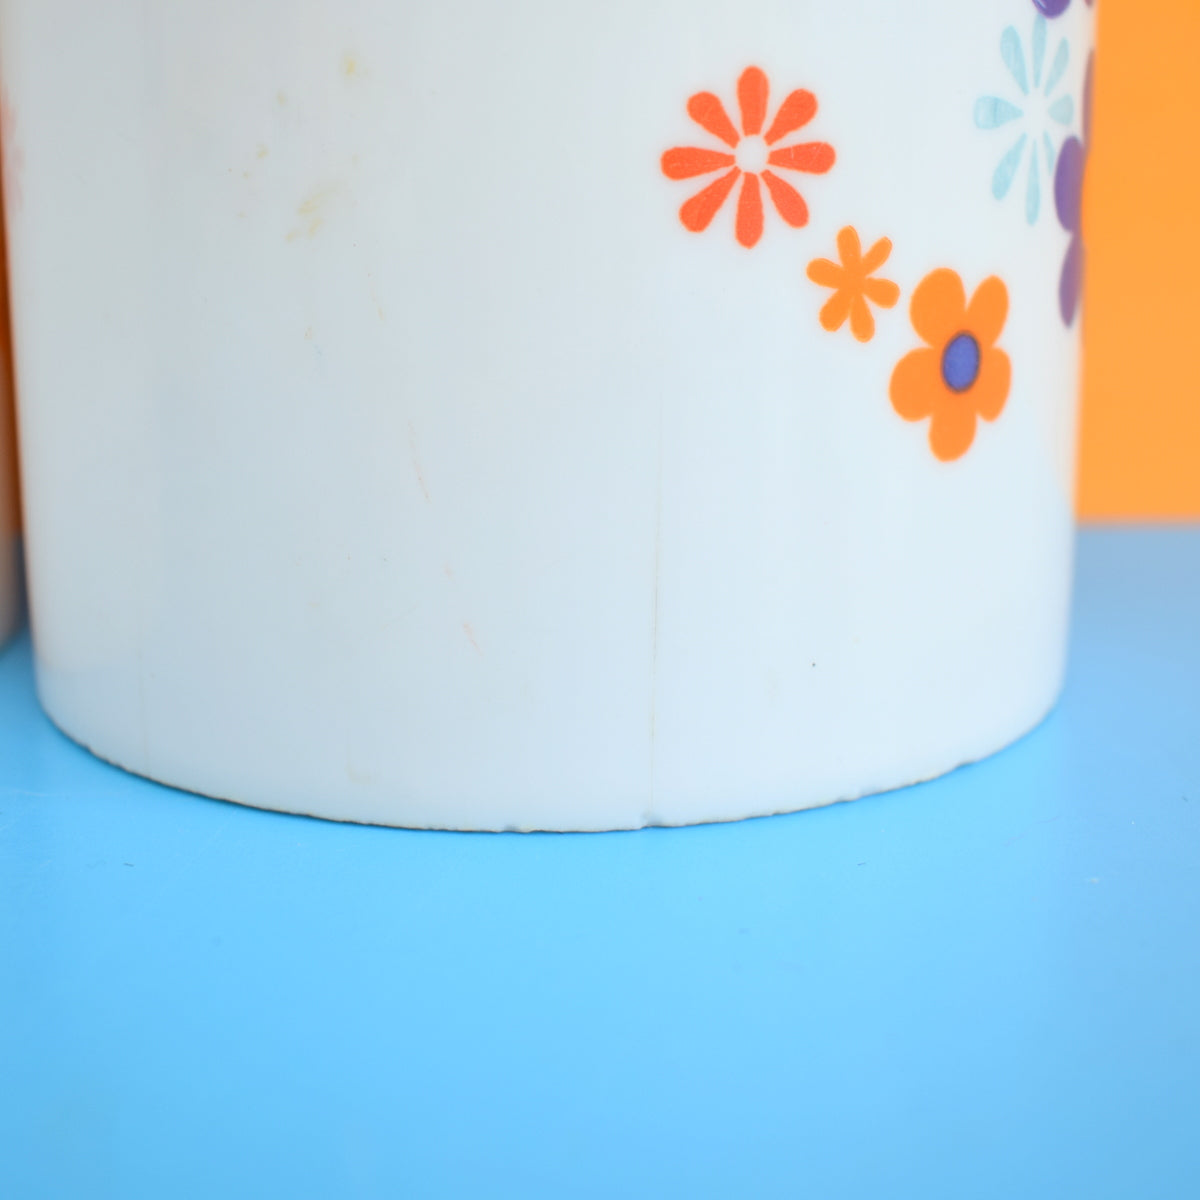 Vintage 1970s Flower Power Plastic Canister - Orange, Yellow & Blue - A/F